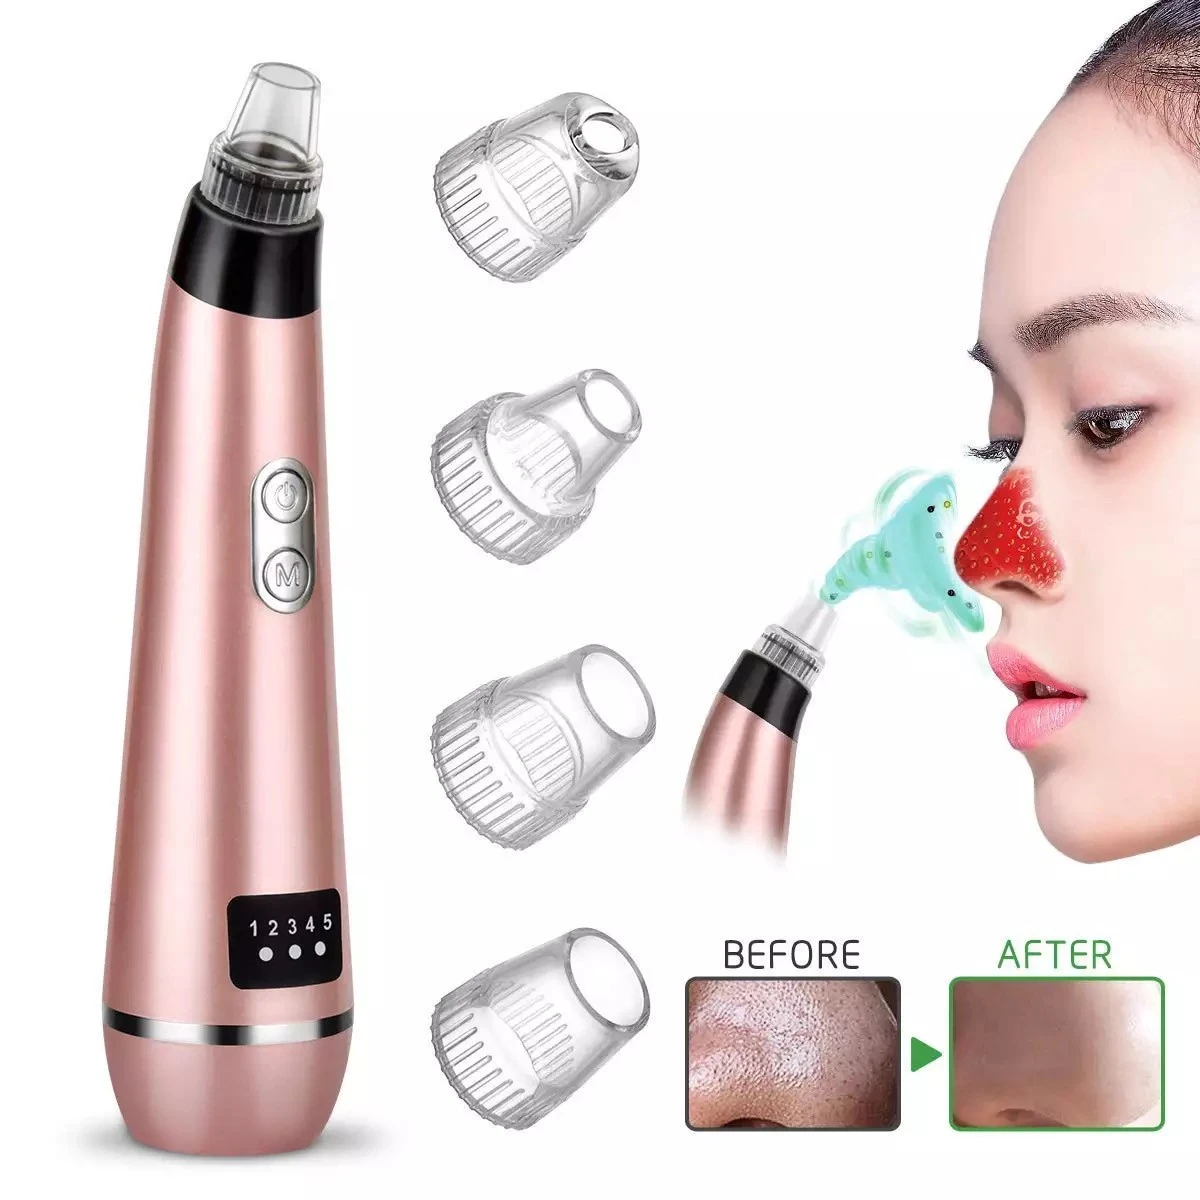 FDA 2019 New Arrivals  Best Selling Beauty Device Products Facial Pore Cleaner Blackhead Remover Suction Vacuum